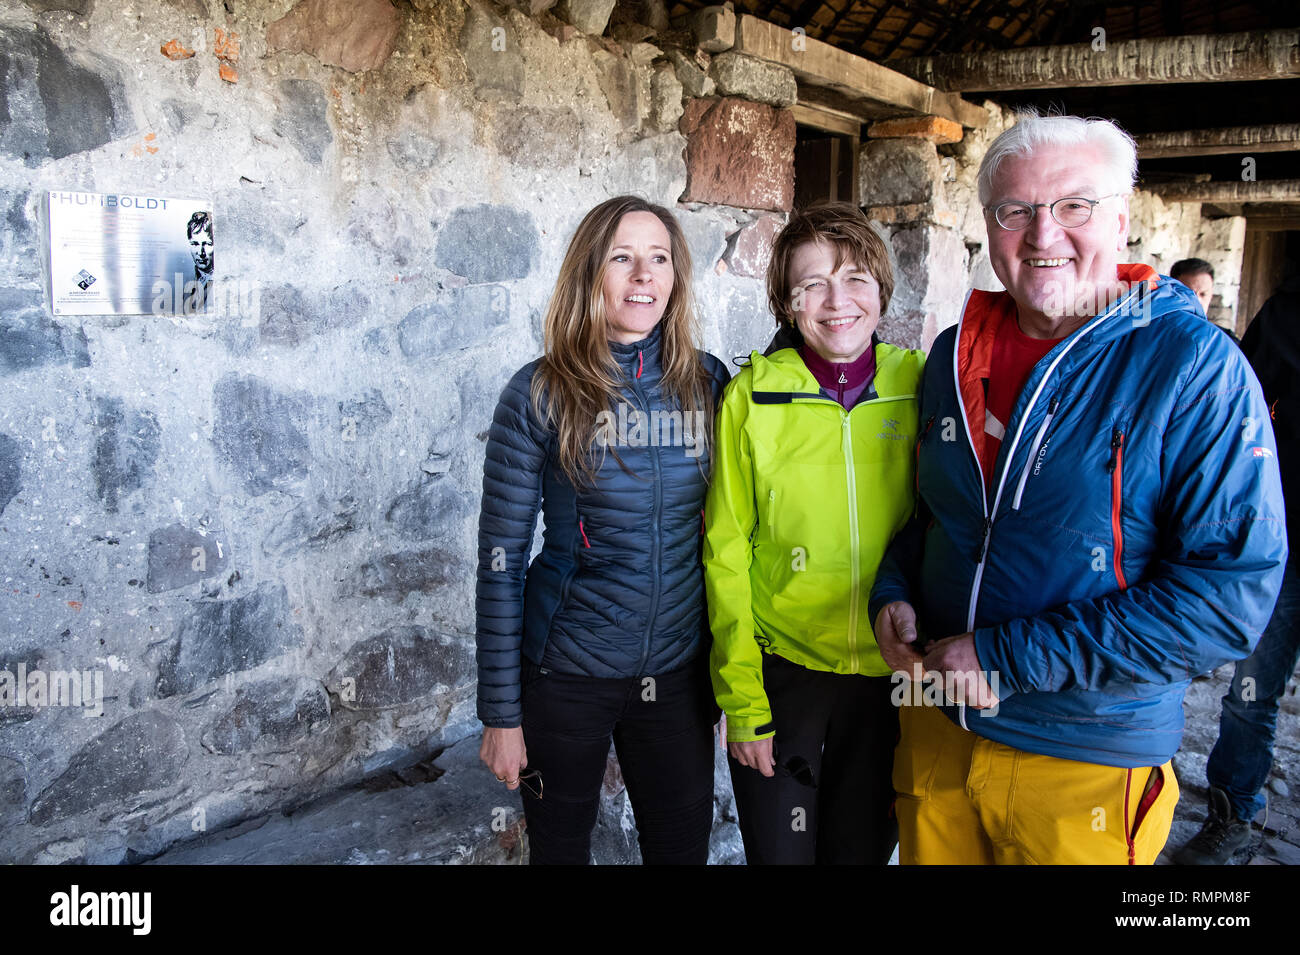 Antisana, Ecuador. 15th Feb, 2019. Federal President Frank-Walter Steinmeier and his wife Elke Büdenbender, together with art historian Andrea Wulff (l), visit the Alexander von Humboldt-Hütte in the nature reserve and Antisana National Park. Federal President Steinmeier and his wife are visiting Colombia and Ecuador on the occasion of Alexander von Humboldt's 250th birthday as part of a five-day trip to Latin America. Credit: Bernd von Jutrczenka/dpa/Alamy Live News Stock Photo